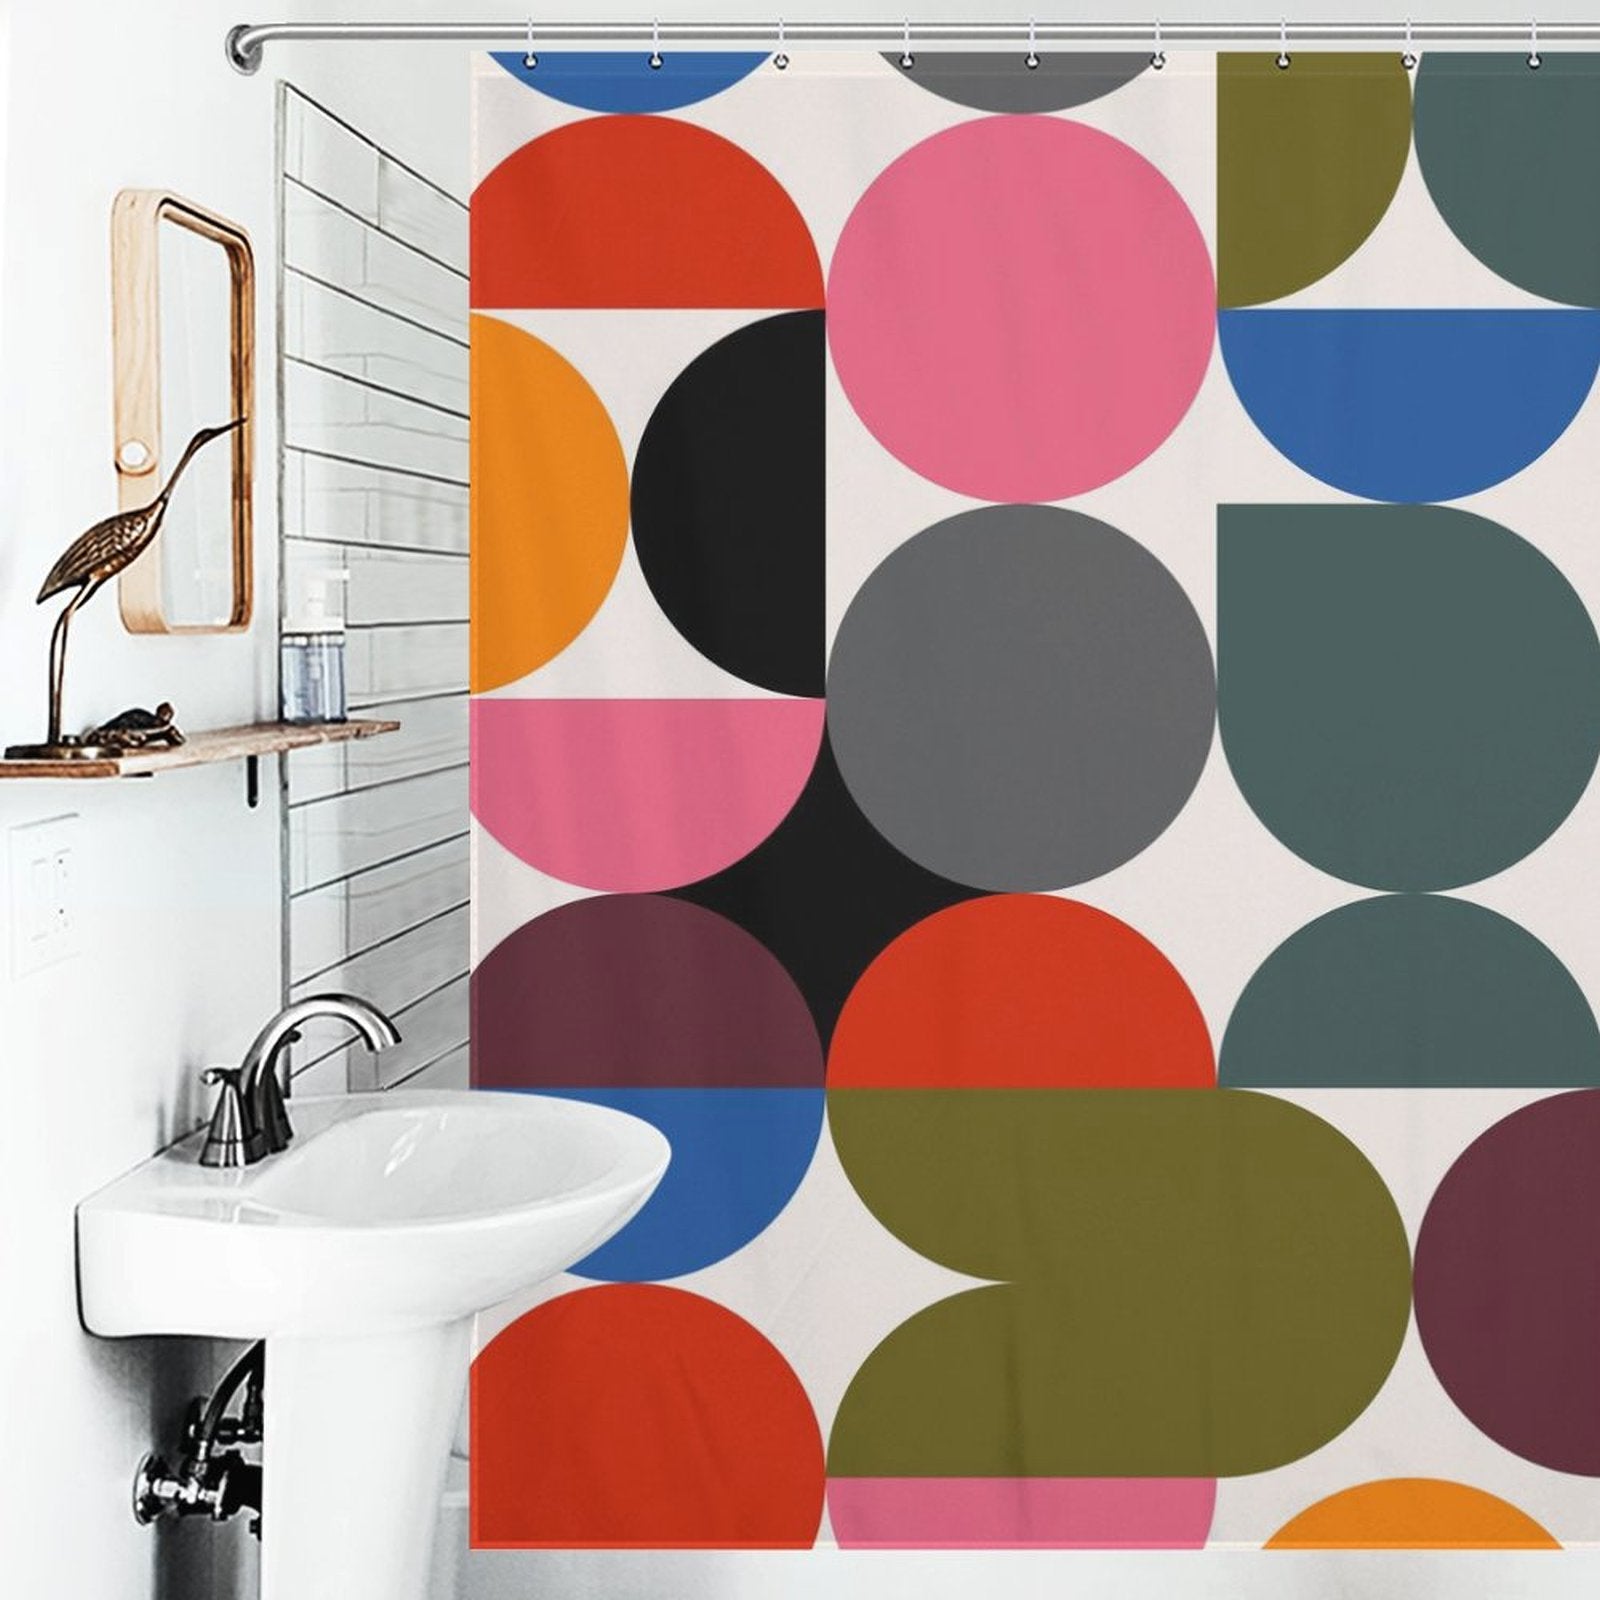 A bathroom featuring a white sink and a Cotton Cat Abstract Modern Art Rainbow Polka Dot Geometric Shower Curtain-Cottoncat with bold, abstract modern art in various colors including red, pink, black, gray, green, blue, and orange shapes.